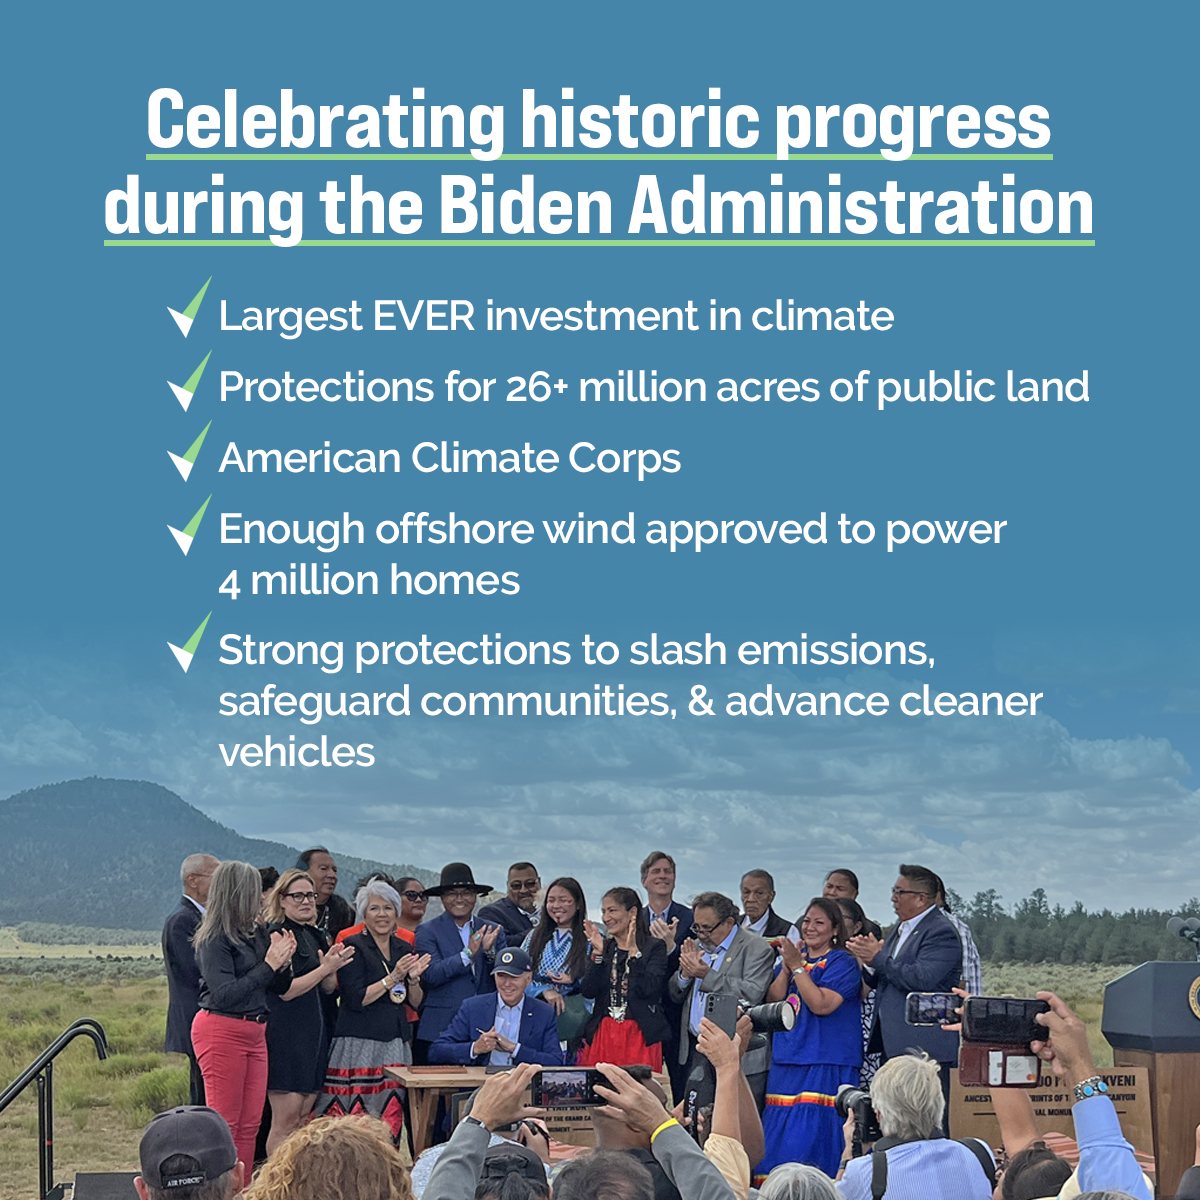 Happy Earth Day! Over the last few years, @HouseDemocrats have delivered historic progress for our climate and communities. Democrats are investing in healthy communities and saving Americans thousands during tax season.